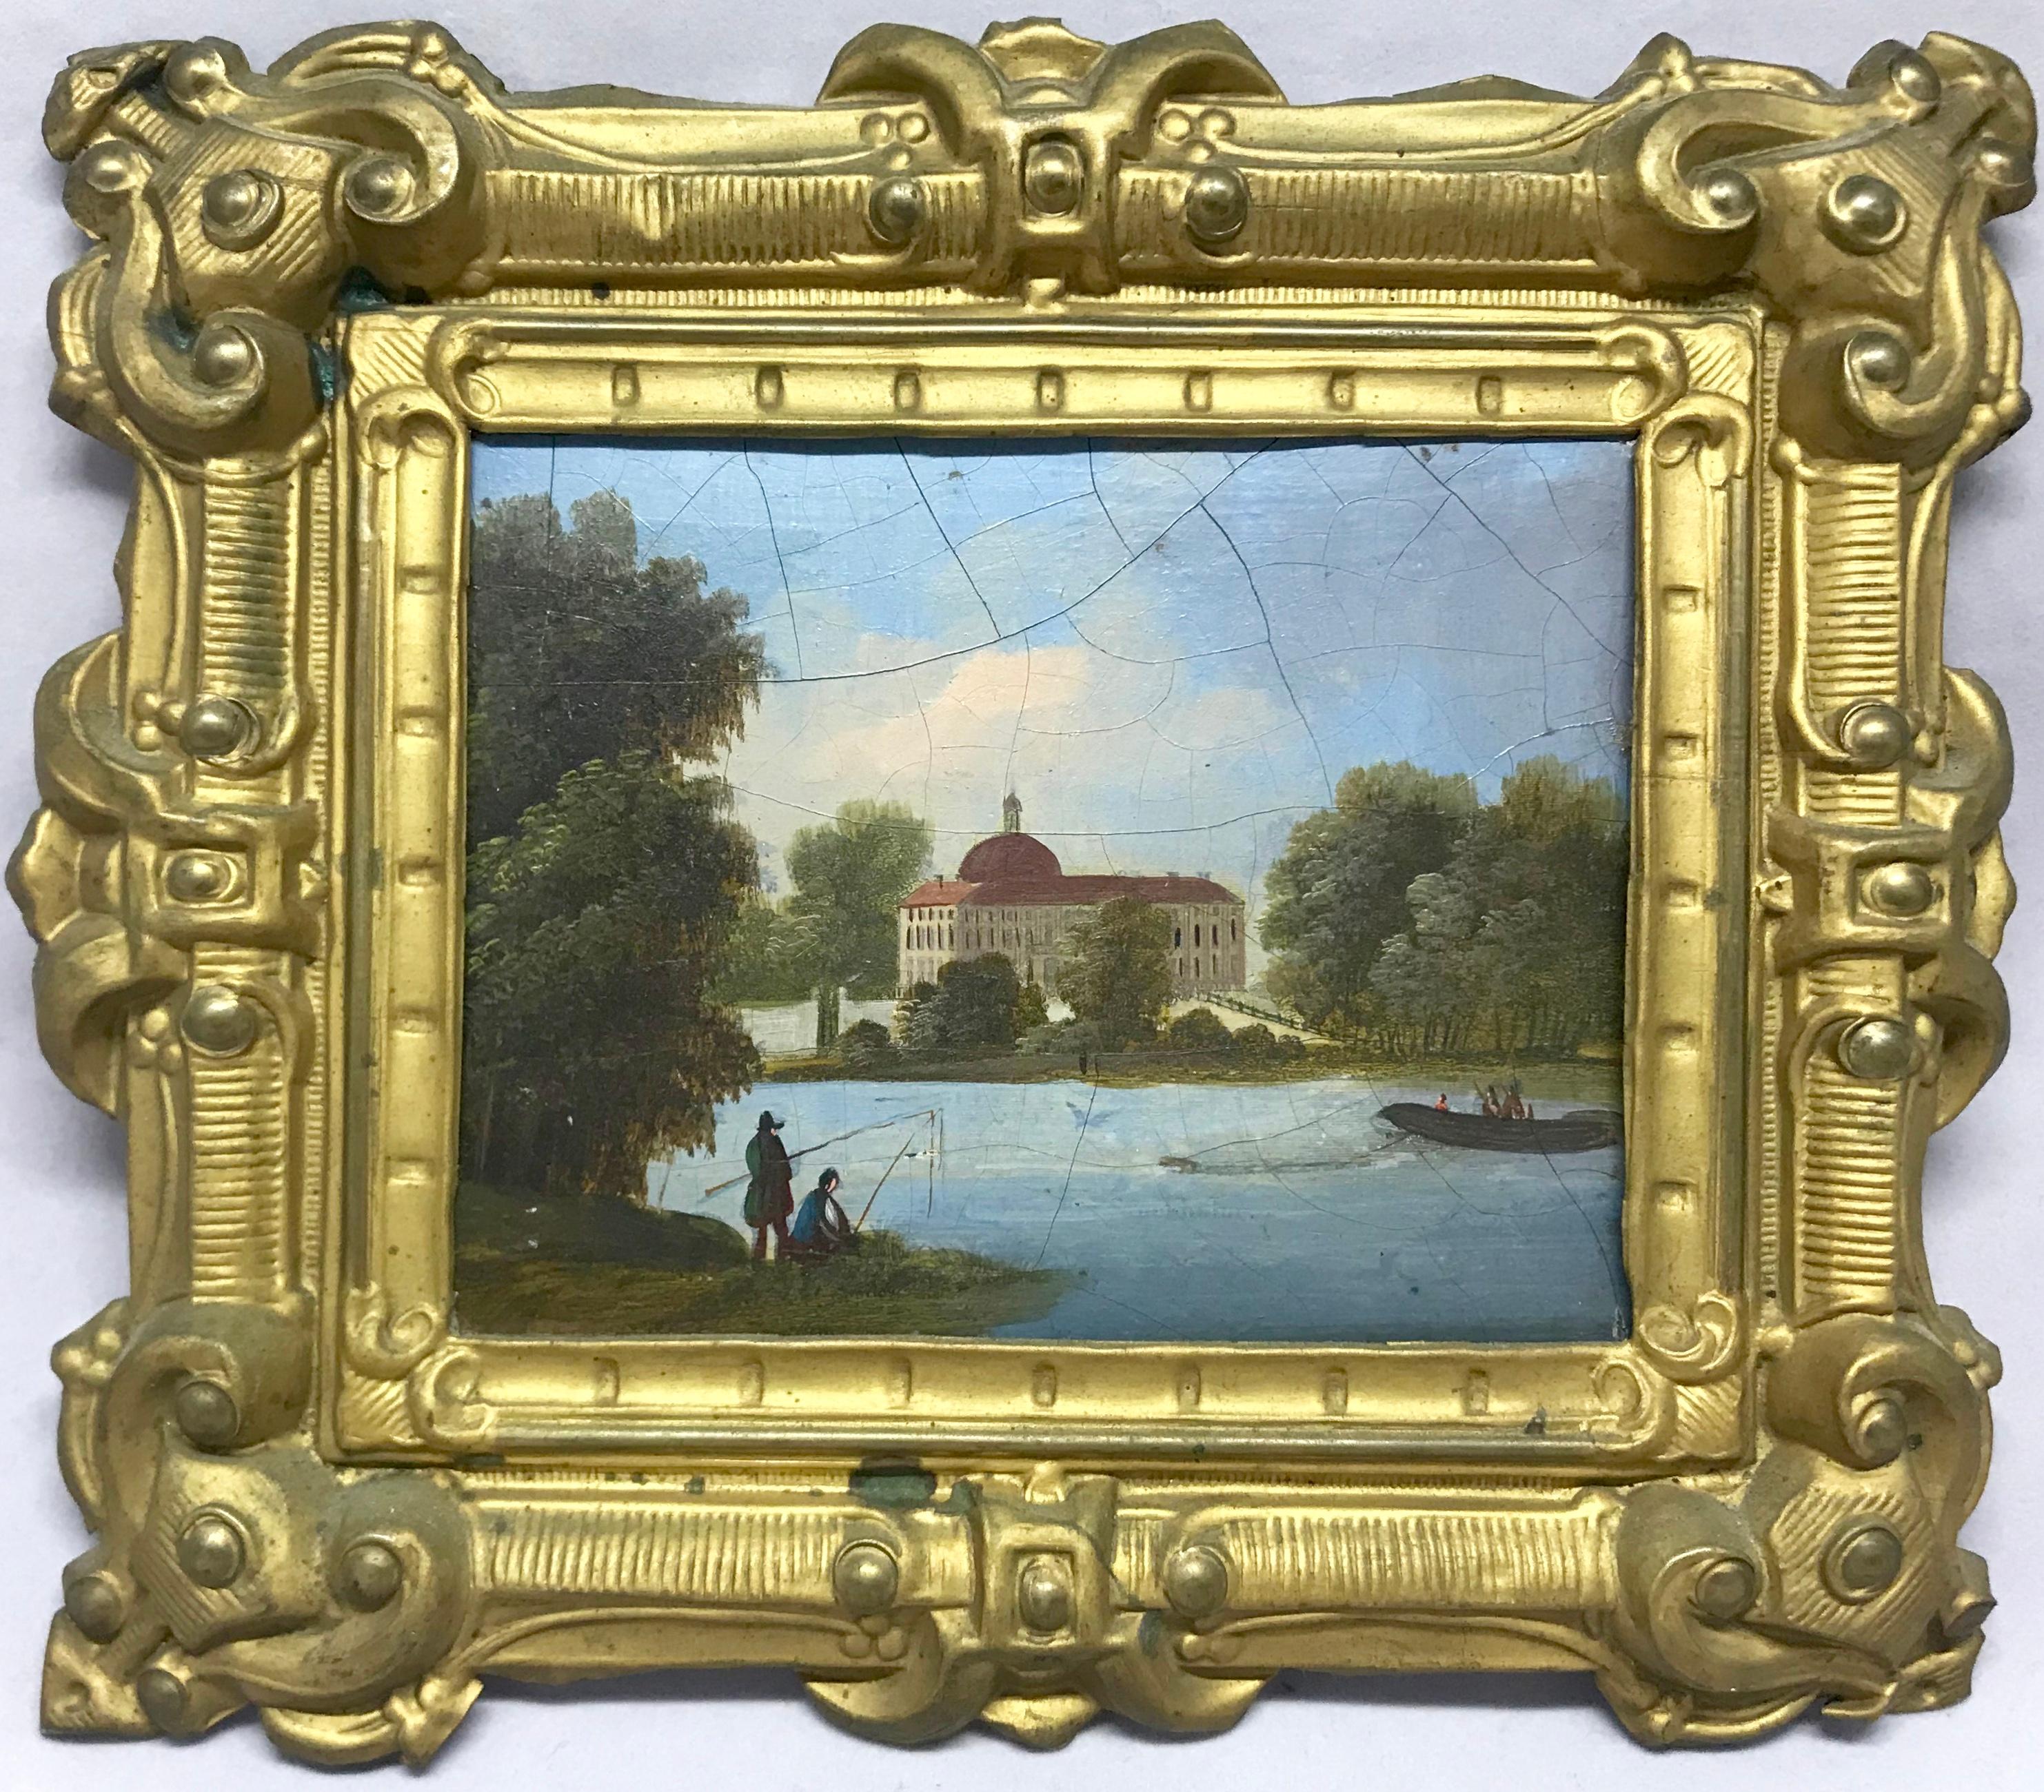 Pair of Continental field and stream paintings on brass. Pair of brass framed continental hunting/fishing scenes painted on brass in original brass repousse frames. Northern Europe, mid-19th century. 
Dimensions: 7